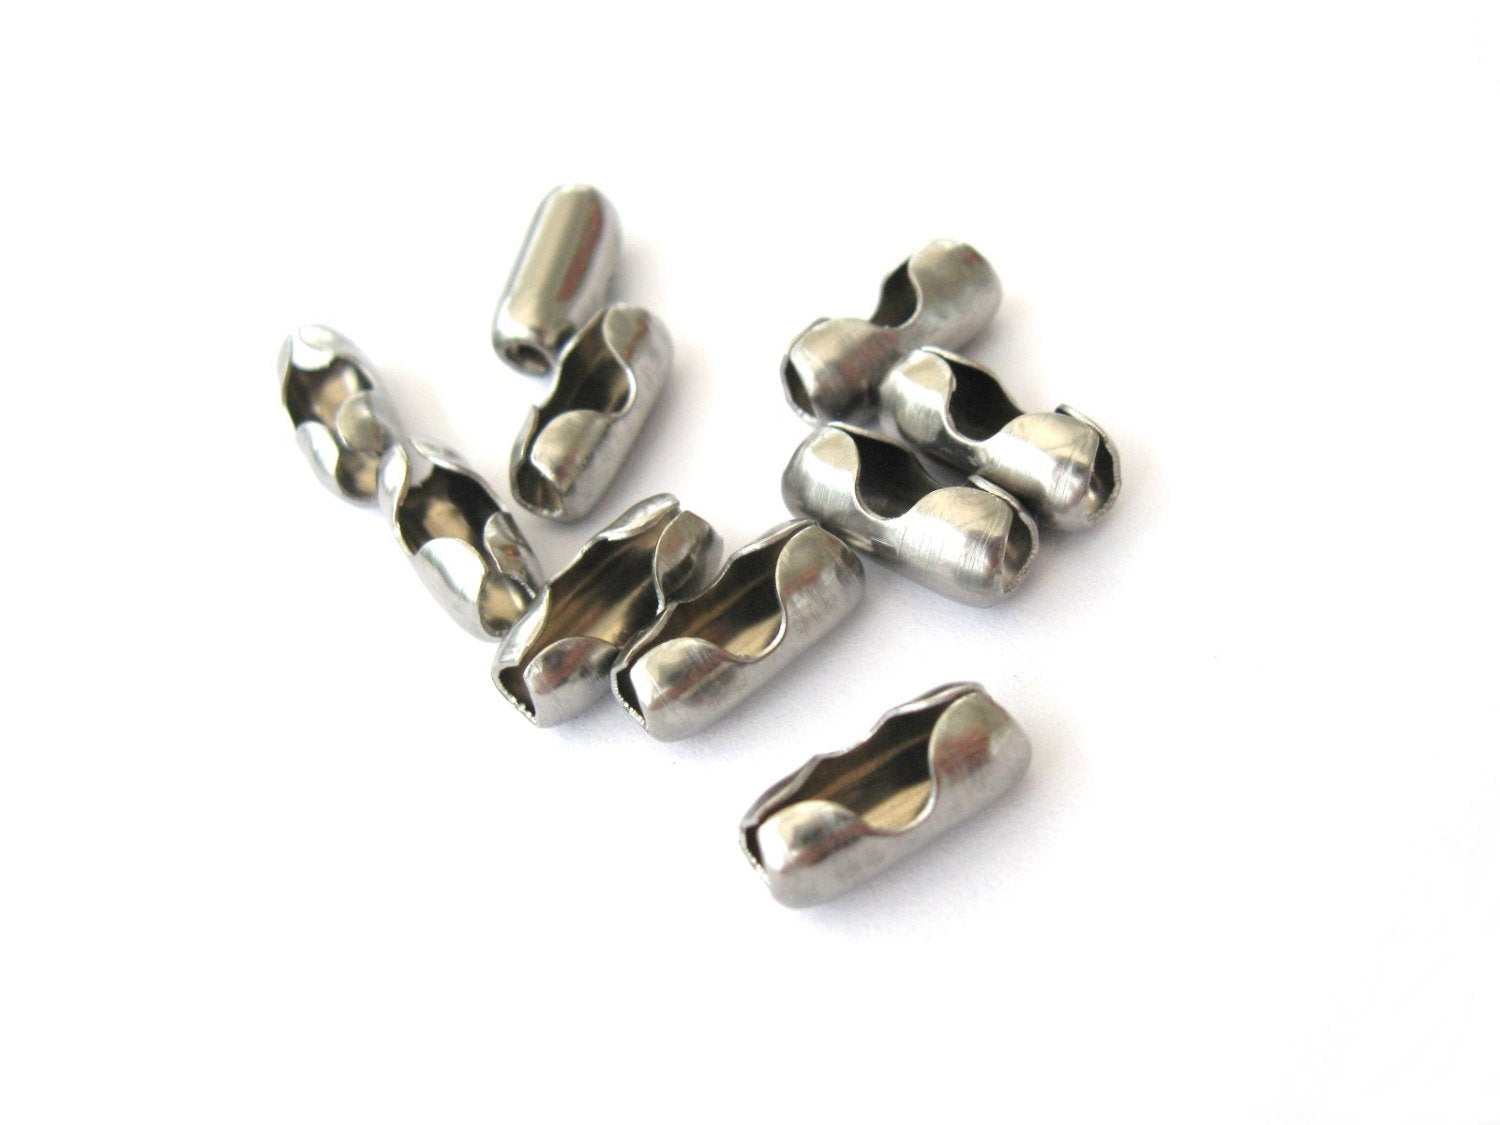 Wholesale 304 Stainless Steel Ball Chain Connectors 